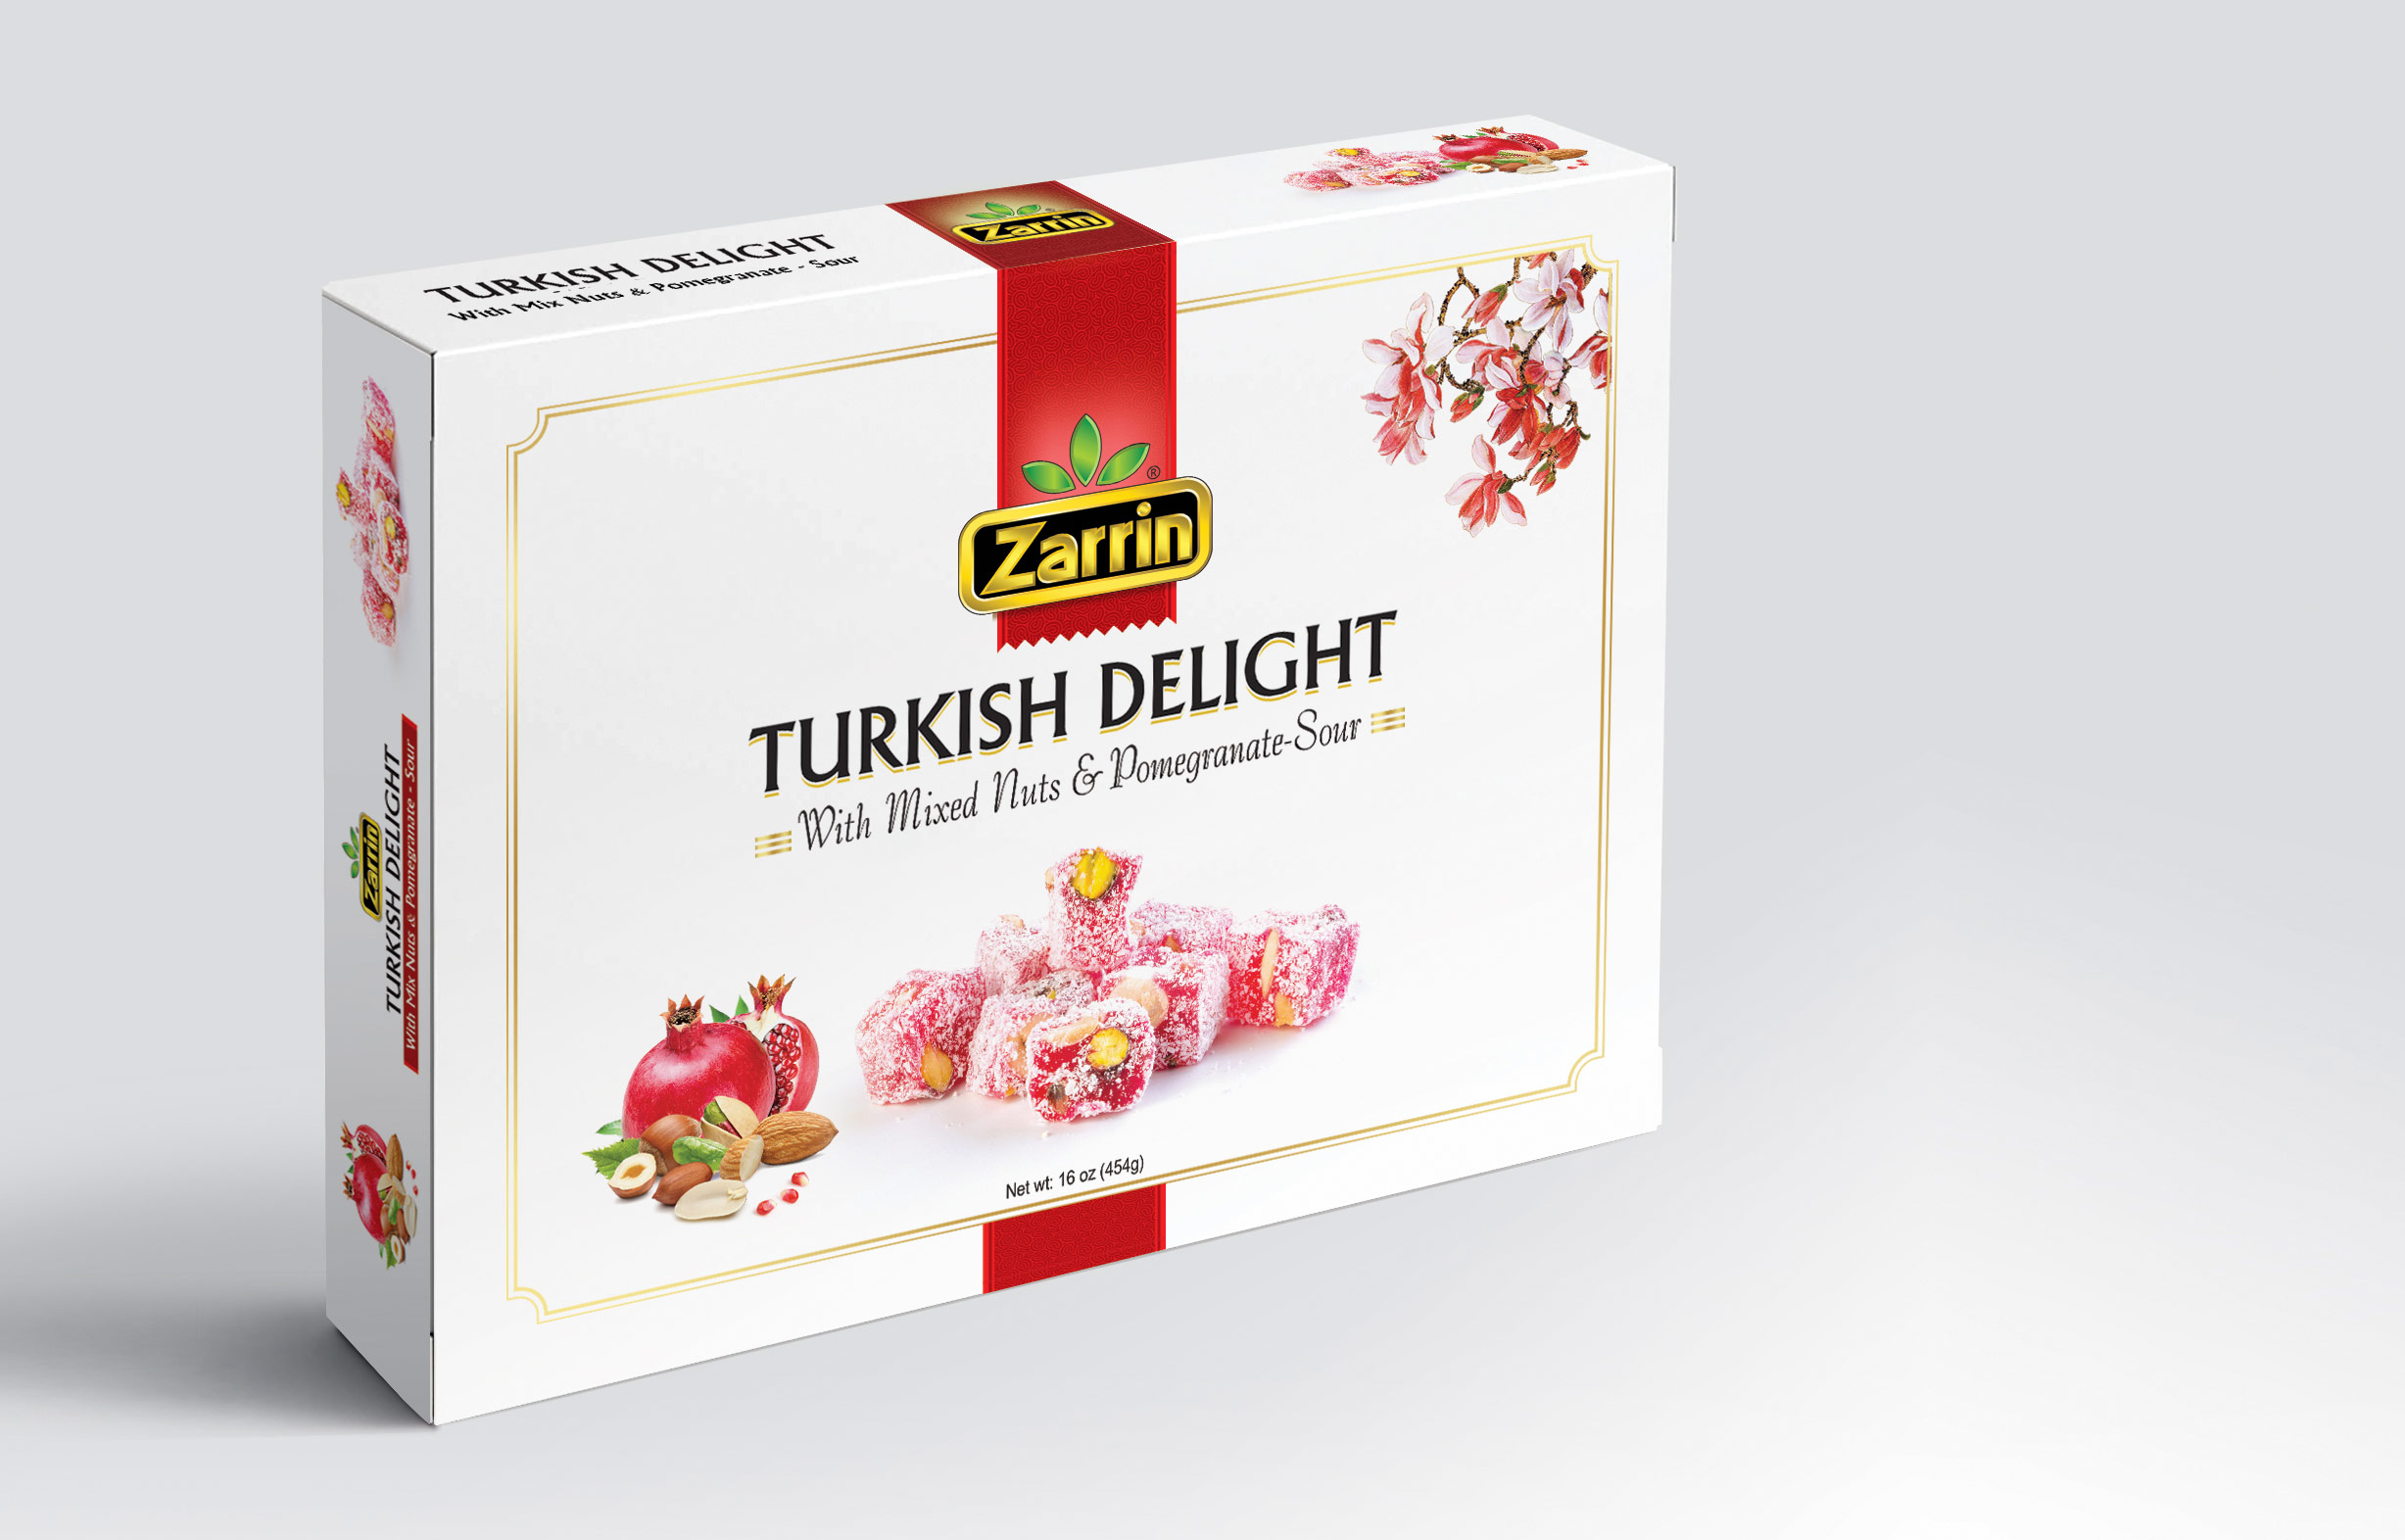 Zarrin Turkish Delight With Mixed Nuts & Pomegranate Sour in 16oz box.